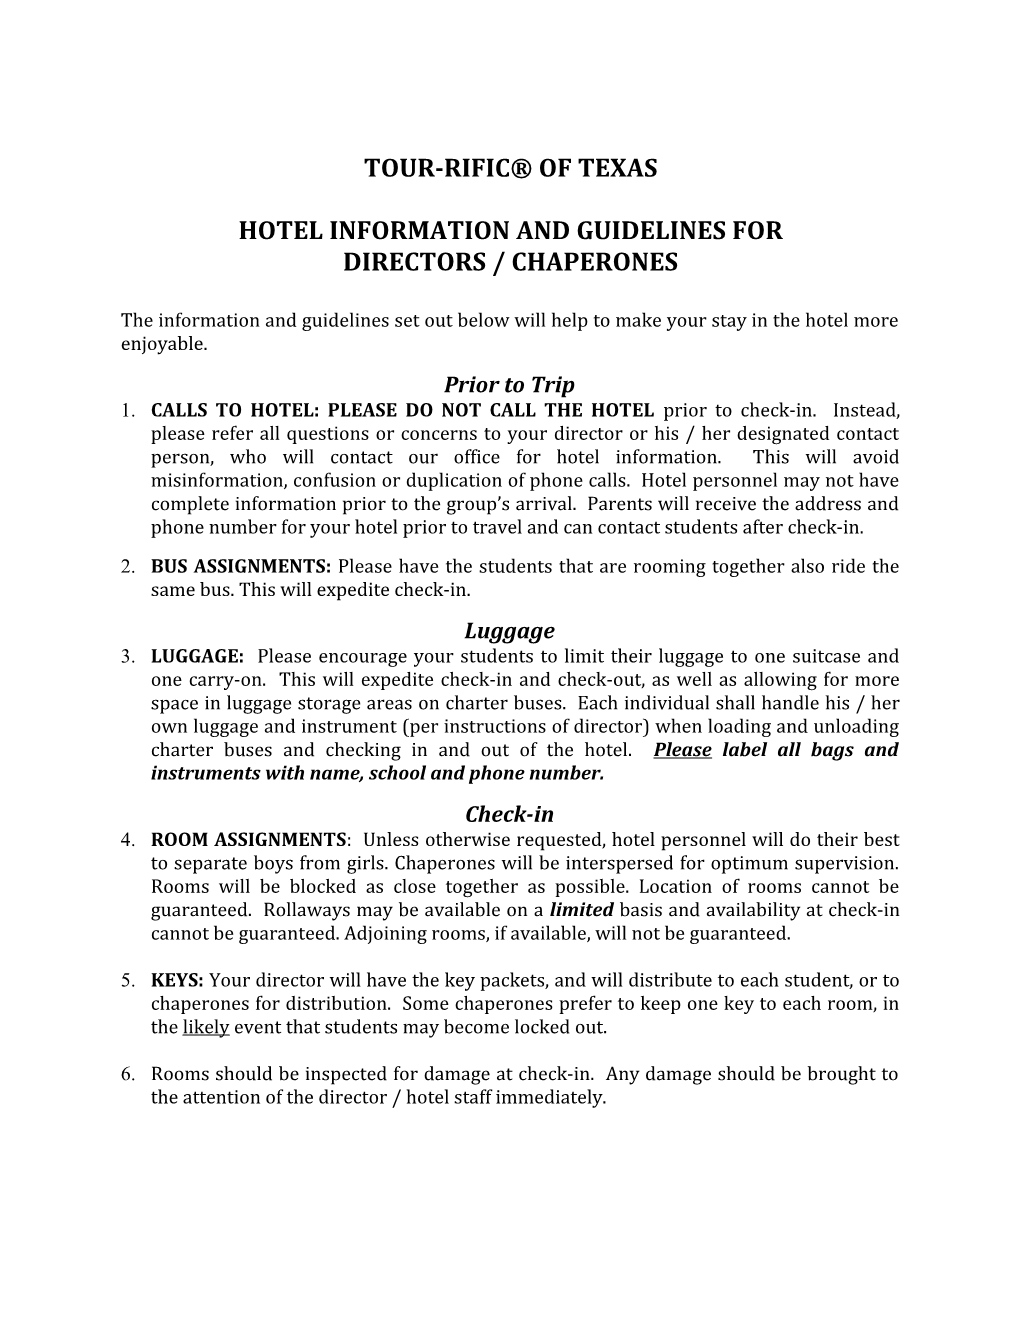 Hotel Information and Guidelines For